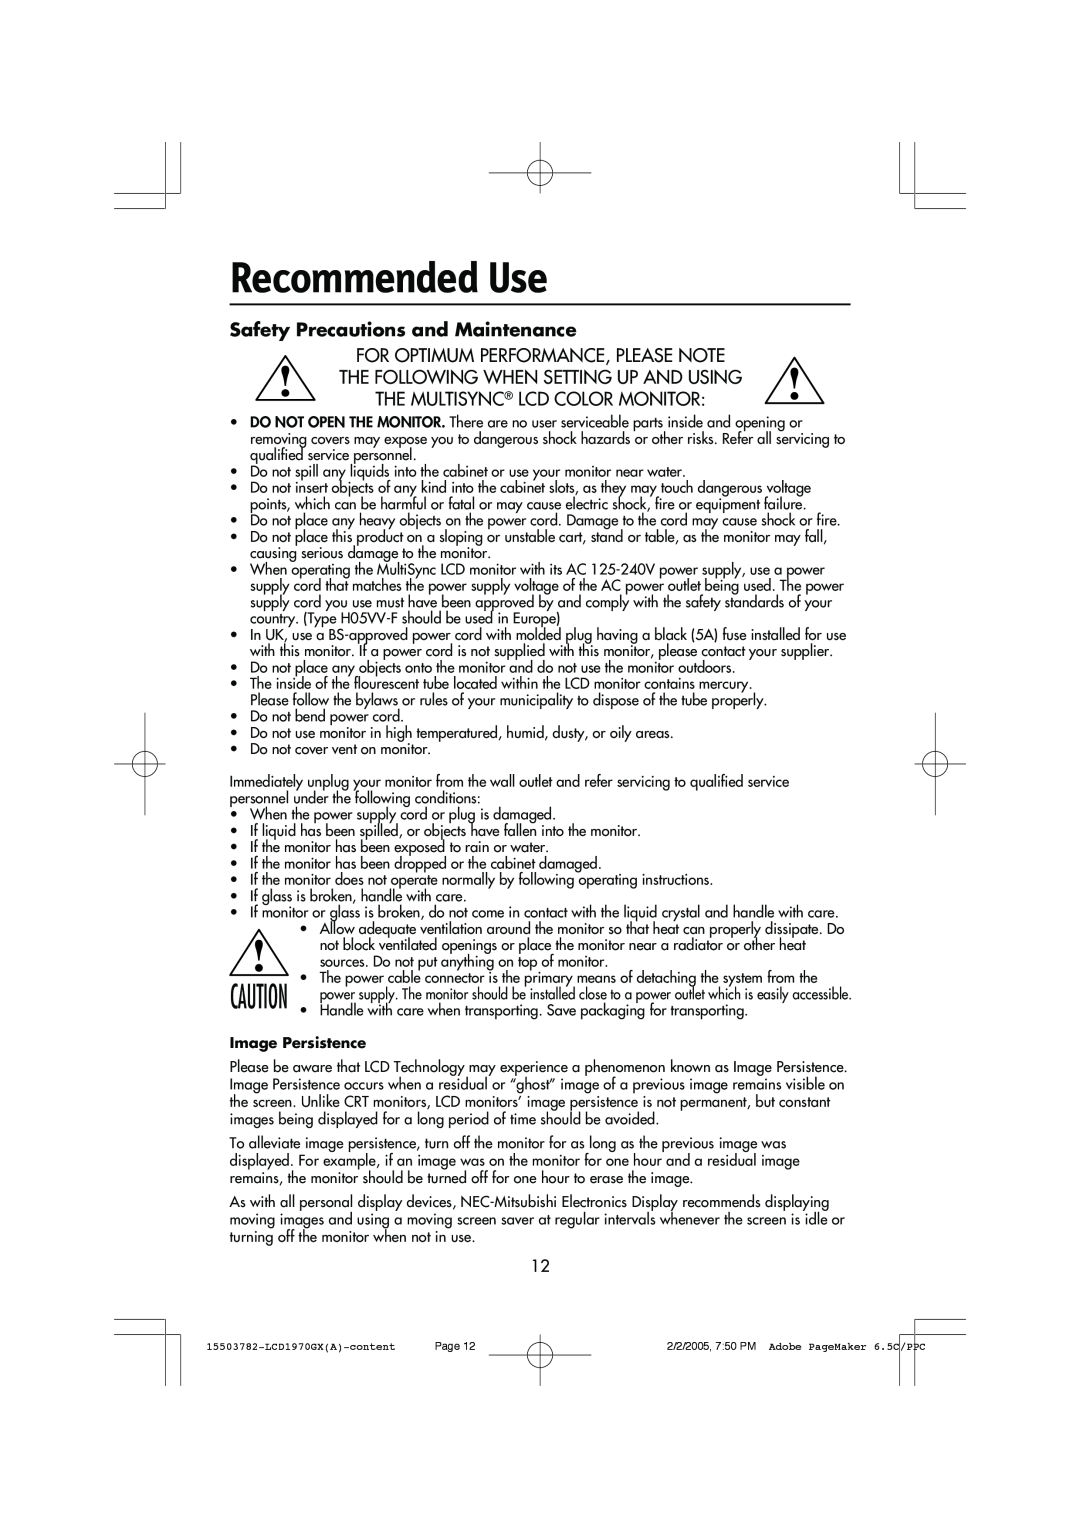 NEC LCD1970GX user manual Recommended Use, Safety Precautions and Maintenance 